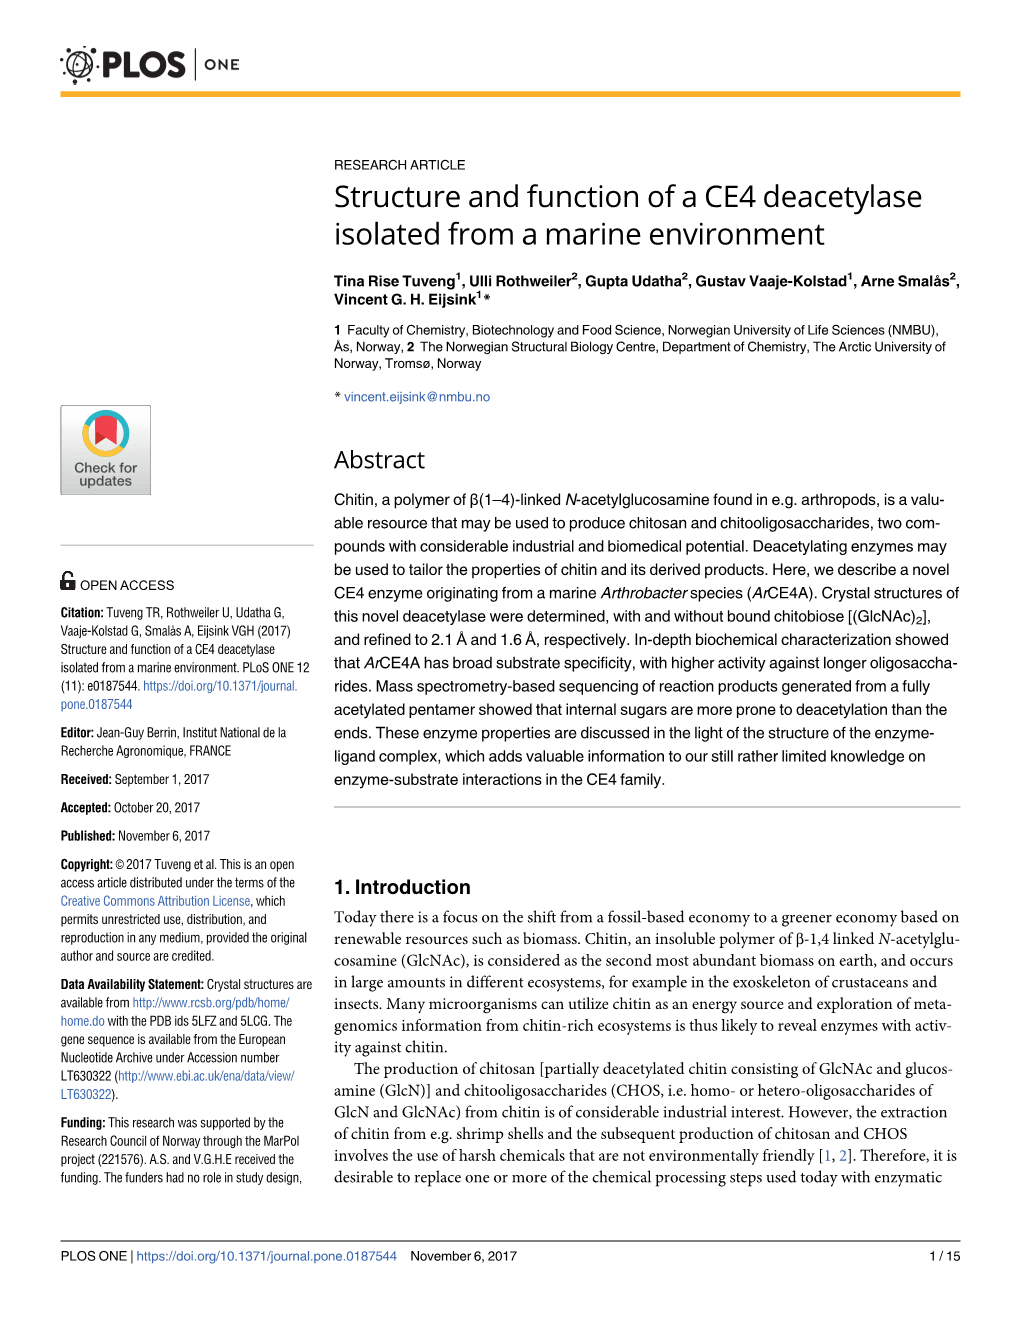 Structure and Function of a CE4 Deacetylase Isolated from a Marine Environment